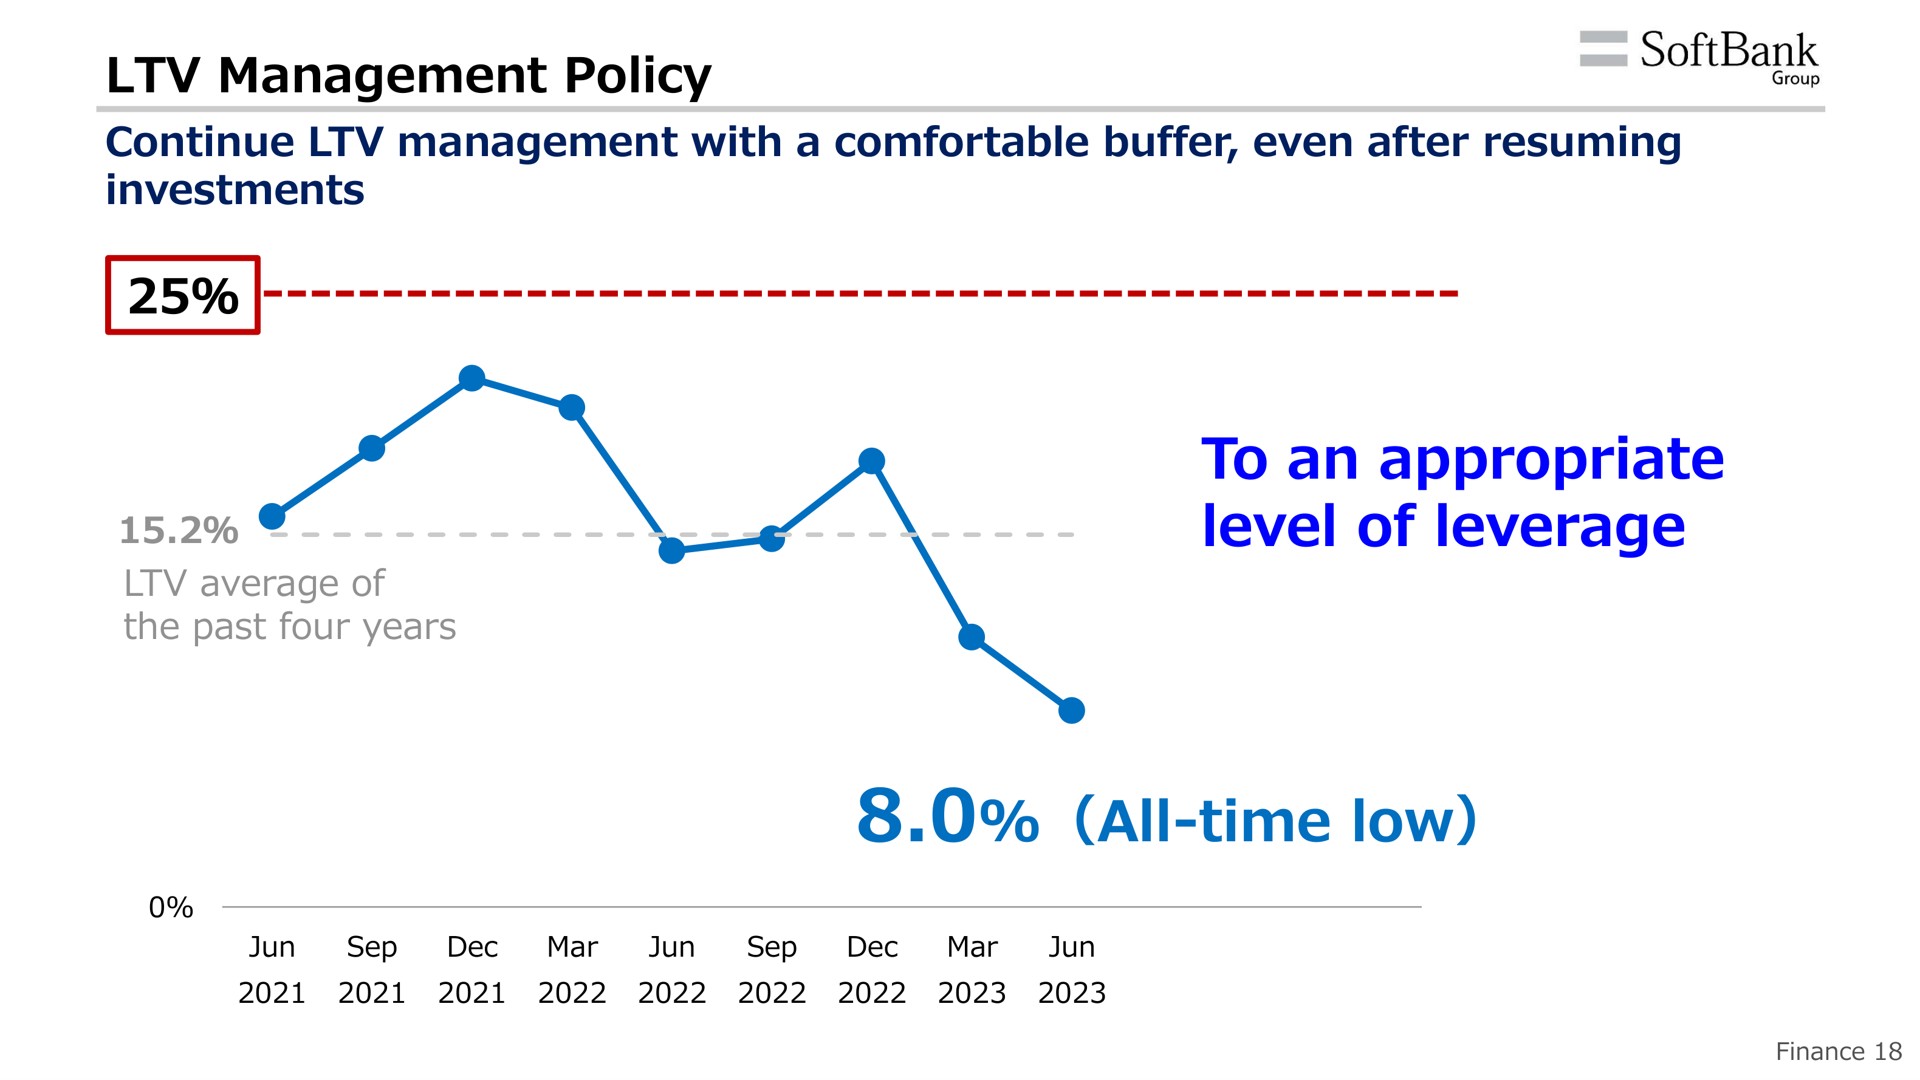 management policy continue management with a comfortable buffer even after resuming investments to an appropriate level of leverage all time low | SoftBank